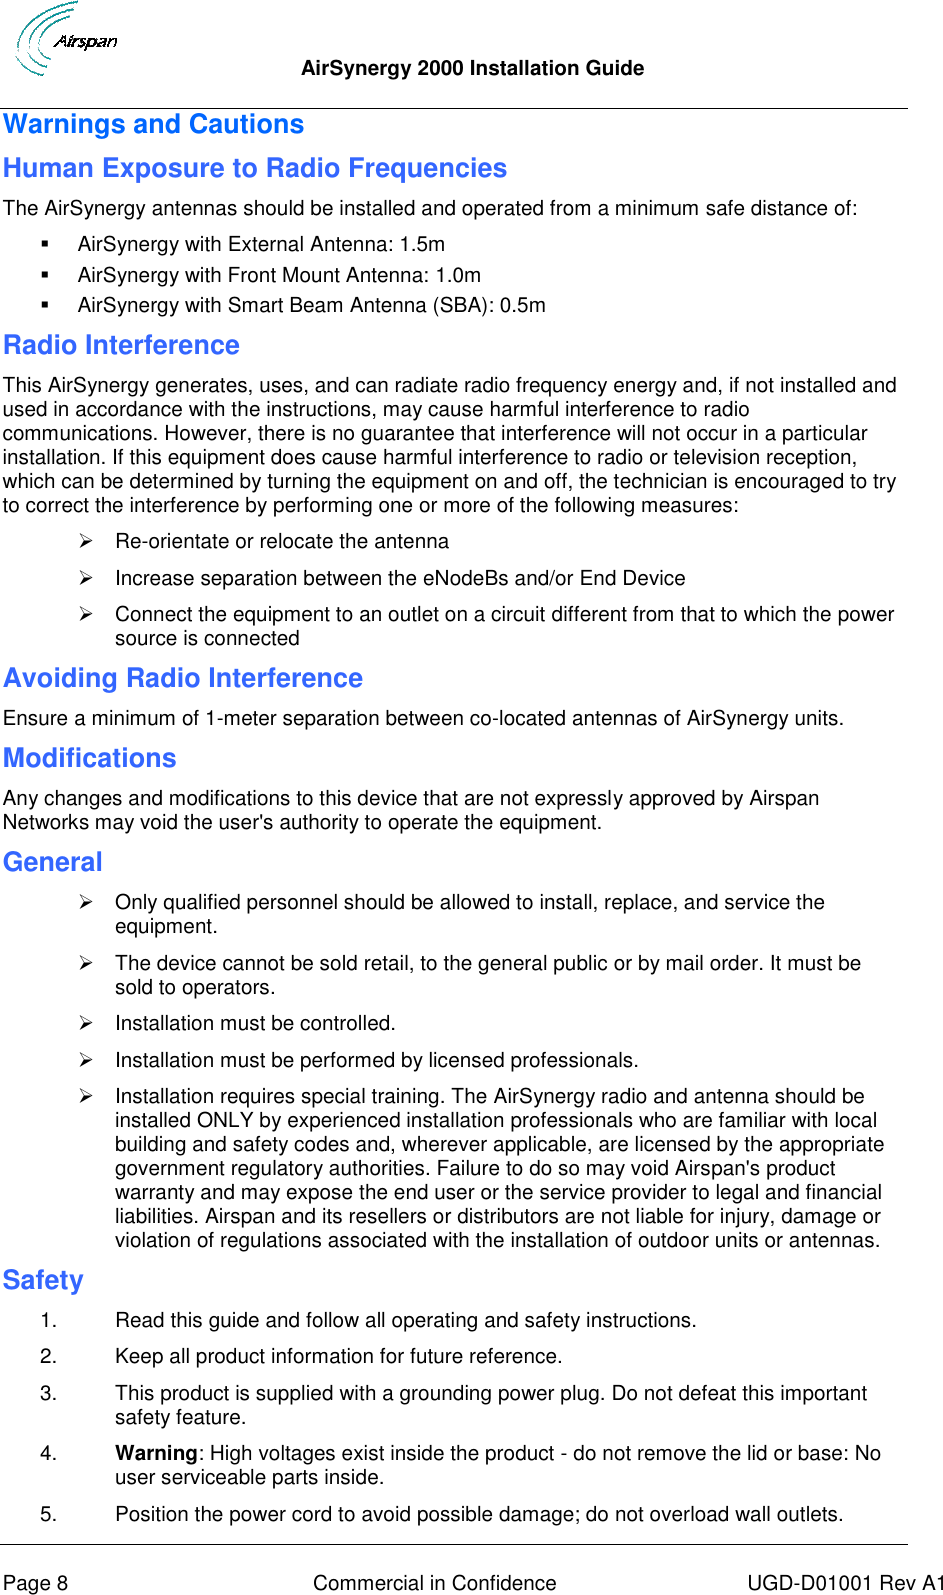  AirSynergy 2000 Installation Guide     Page 8  Commercial in Confidence  UGD-D01001 Rev A1 Warnings and Cautions Human Exposure to Radio Frequencies The AirSynergy antennas should be installed and operated from a minimum safe distance of:   AirSynergy with External Antenna: 1.5m   AirSynergy with Front Mount Antenna: 1.0m   AirSynergy with Smart Beam Antenna (SBA): 0.5m  Radio Interference This AirSynergy generates, uses, and can radiate radio frequency energy and, if not installed and used in accordance with the instructions, may cause harmful interference to radio communications. However, there is no guarantee that interference will not occur in a particular installation. If this equipment does cause harmful interference to radio or television reception, which can be determined by turning the equipment on and off, the technician is encouraged to try to correct the interference by performing one or more of the following measures:  Re-orientate or relocate the antenna    Increase separation between the eNodeBs and/or End Device   Connect the equipment to an outlet on a circuit different from that to which the power source is connected Avoiding Radio Interference  Ensure a minimum of 1-meter separation between co-located antennas of AirSynergy units. Modifications Any changes and modifications to this device that are not expressly approved by Airspan Networks may void the user&apos;s authority to operate the equipment. General   Only qualified personnel should be allowed to install, replace, and service the equipment.   The device cannot be sold retail, to the general public or by mail order. It must be sold to operators.   Installation must be controlled.   Installation must be performed by licensed professionals.   Installation requires special training. The AirSynergy radio and antenna should be installed ONLY by experienced installation professionals who are familiar with local building and safety codes and, wherever applicable, are licensed by the appropriate government regulatory authorities. Failure to do so may void Airspan&apos;s product warranty and may expose the end user or the service provider to legal and financial liabilities. Airspan and its resellers or distributors are not liable for injury, damage or violation of regulations associated with the installation of outdoor units or antennas. Safety  1.  Read this guide and follow all operating and safety instructions. 2.  Keep all product information for future reference. 3.  This product is supplied with a grounding power plug. Do not defeat this important safety feature. 4. Warning: High voltages exist inside the product - do not remove the lid or base: No user serviceable parts inside. 5.  Position the power cord to avoid possible damage; do not overload wall outlets. 